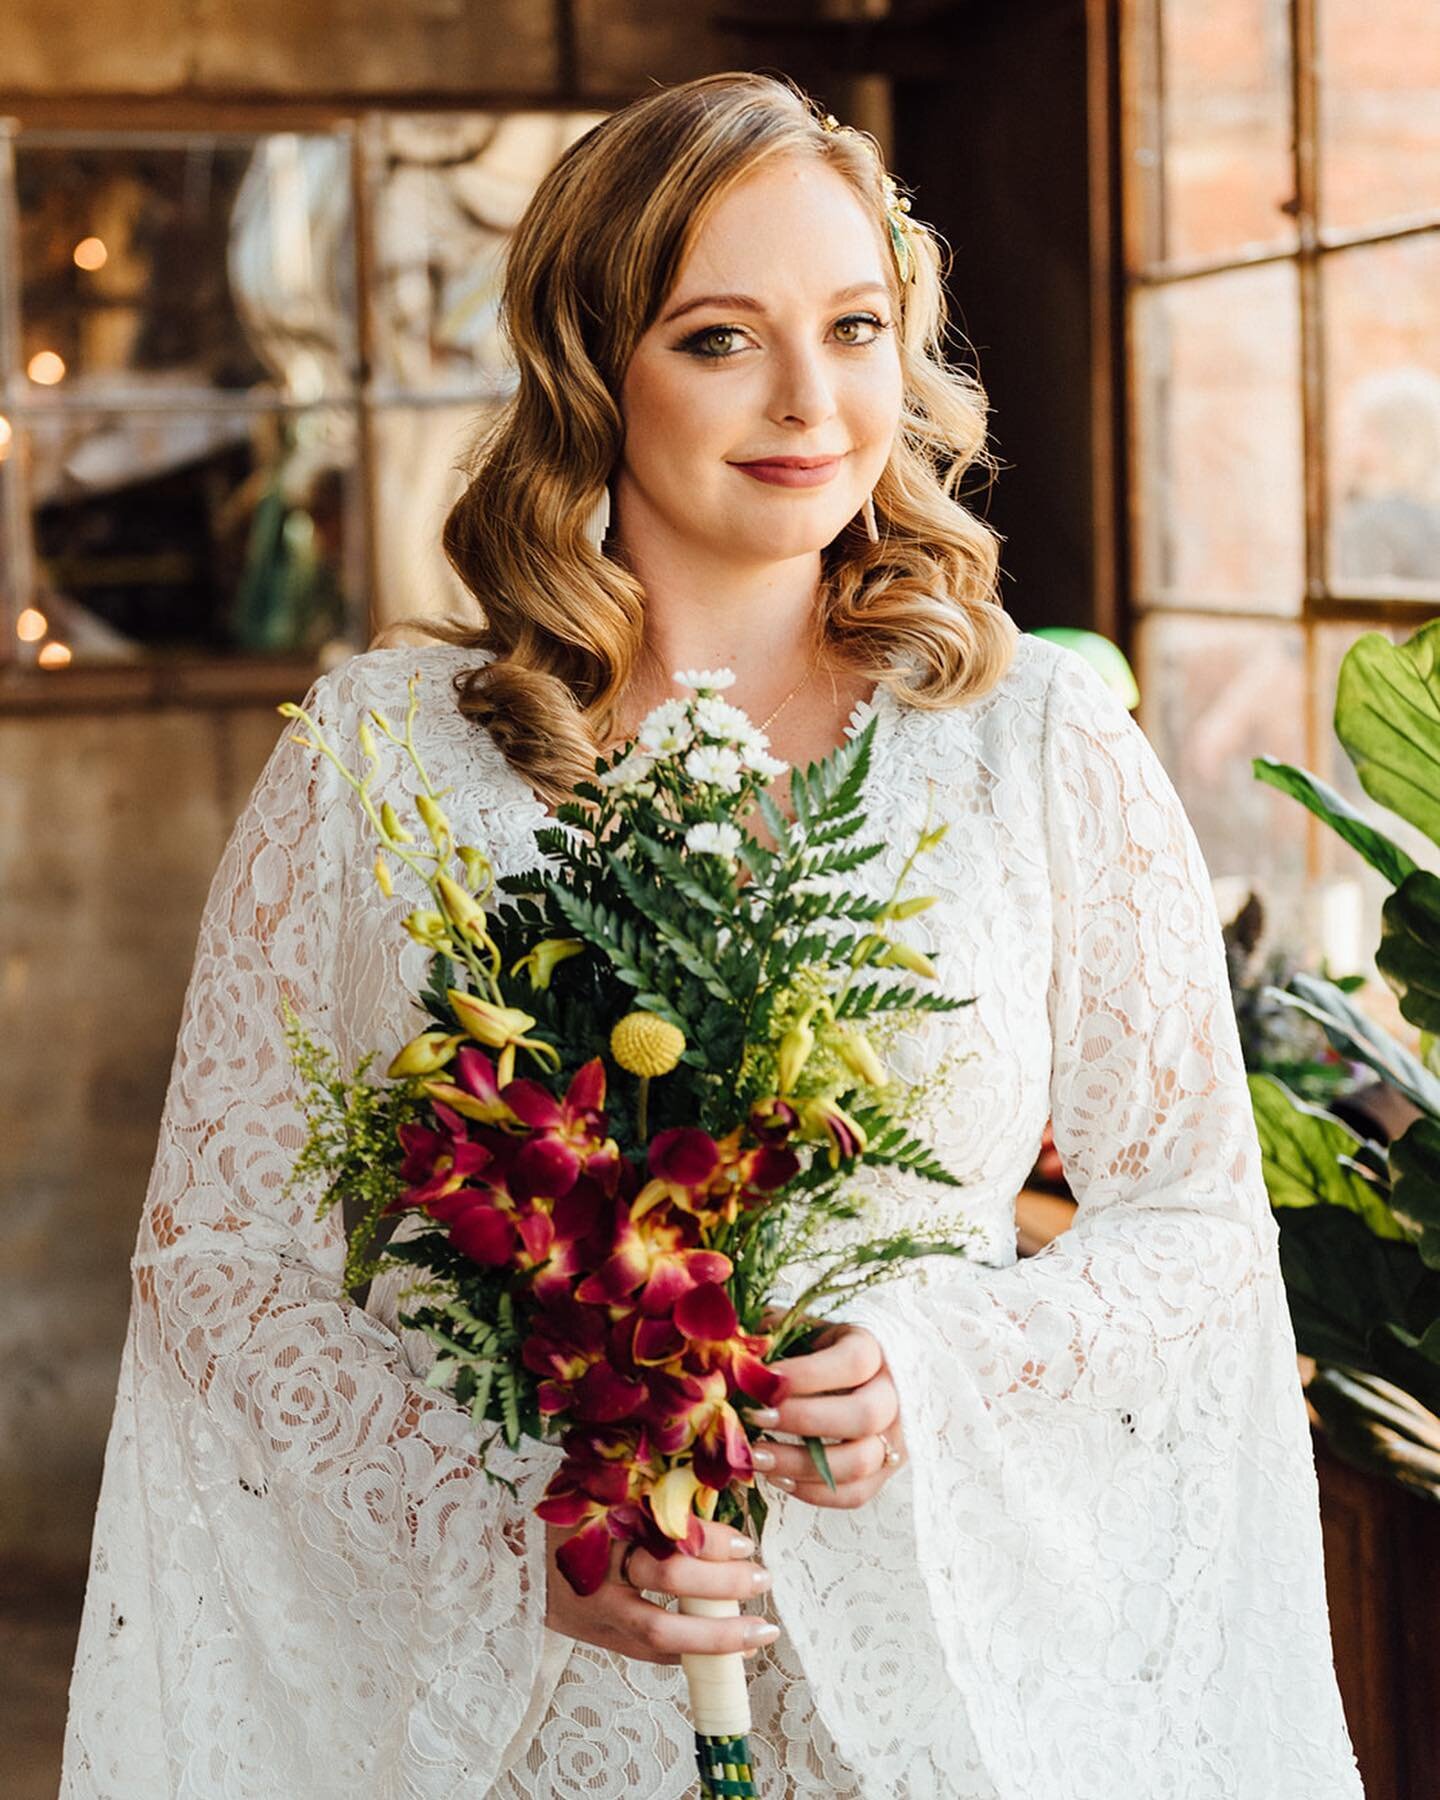 Gorgeous bridal portraits in the holding room of @atlantautilityworks